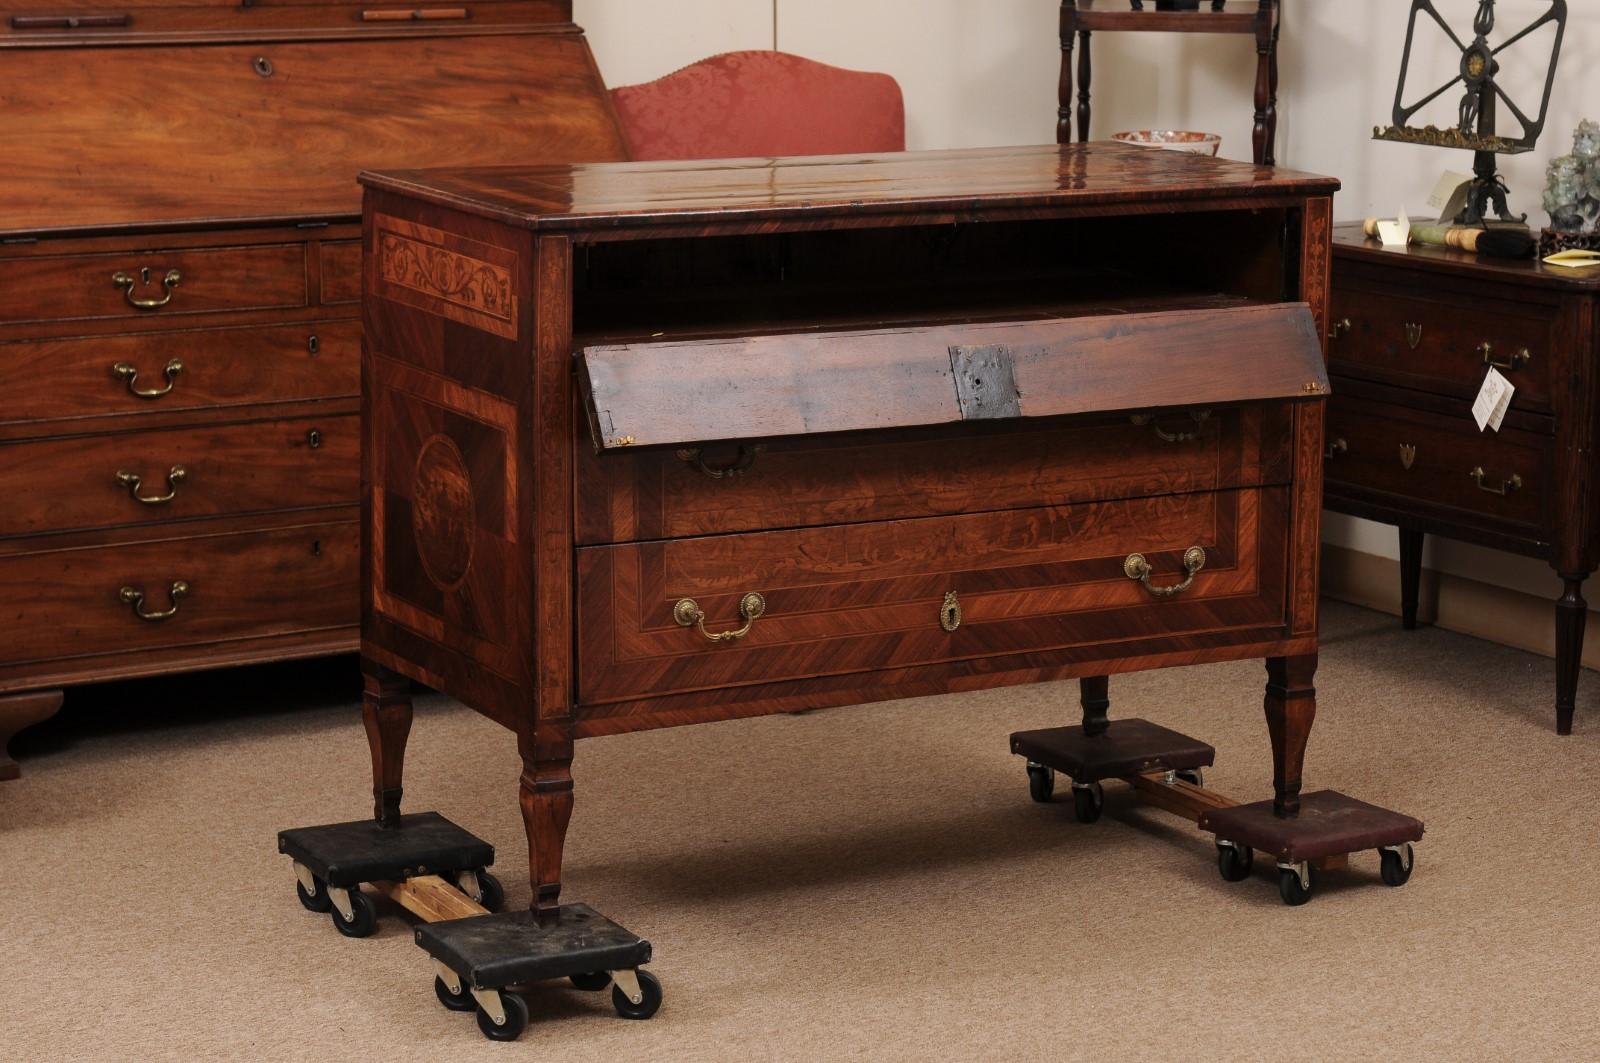 Neoclassical Italian Walnut Commode with Marquetry Inlay & 3 Drawers, ca. 1800 For Sale 5